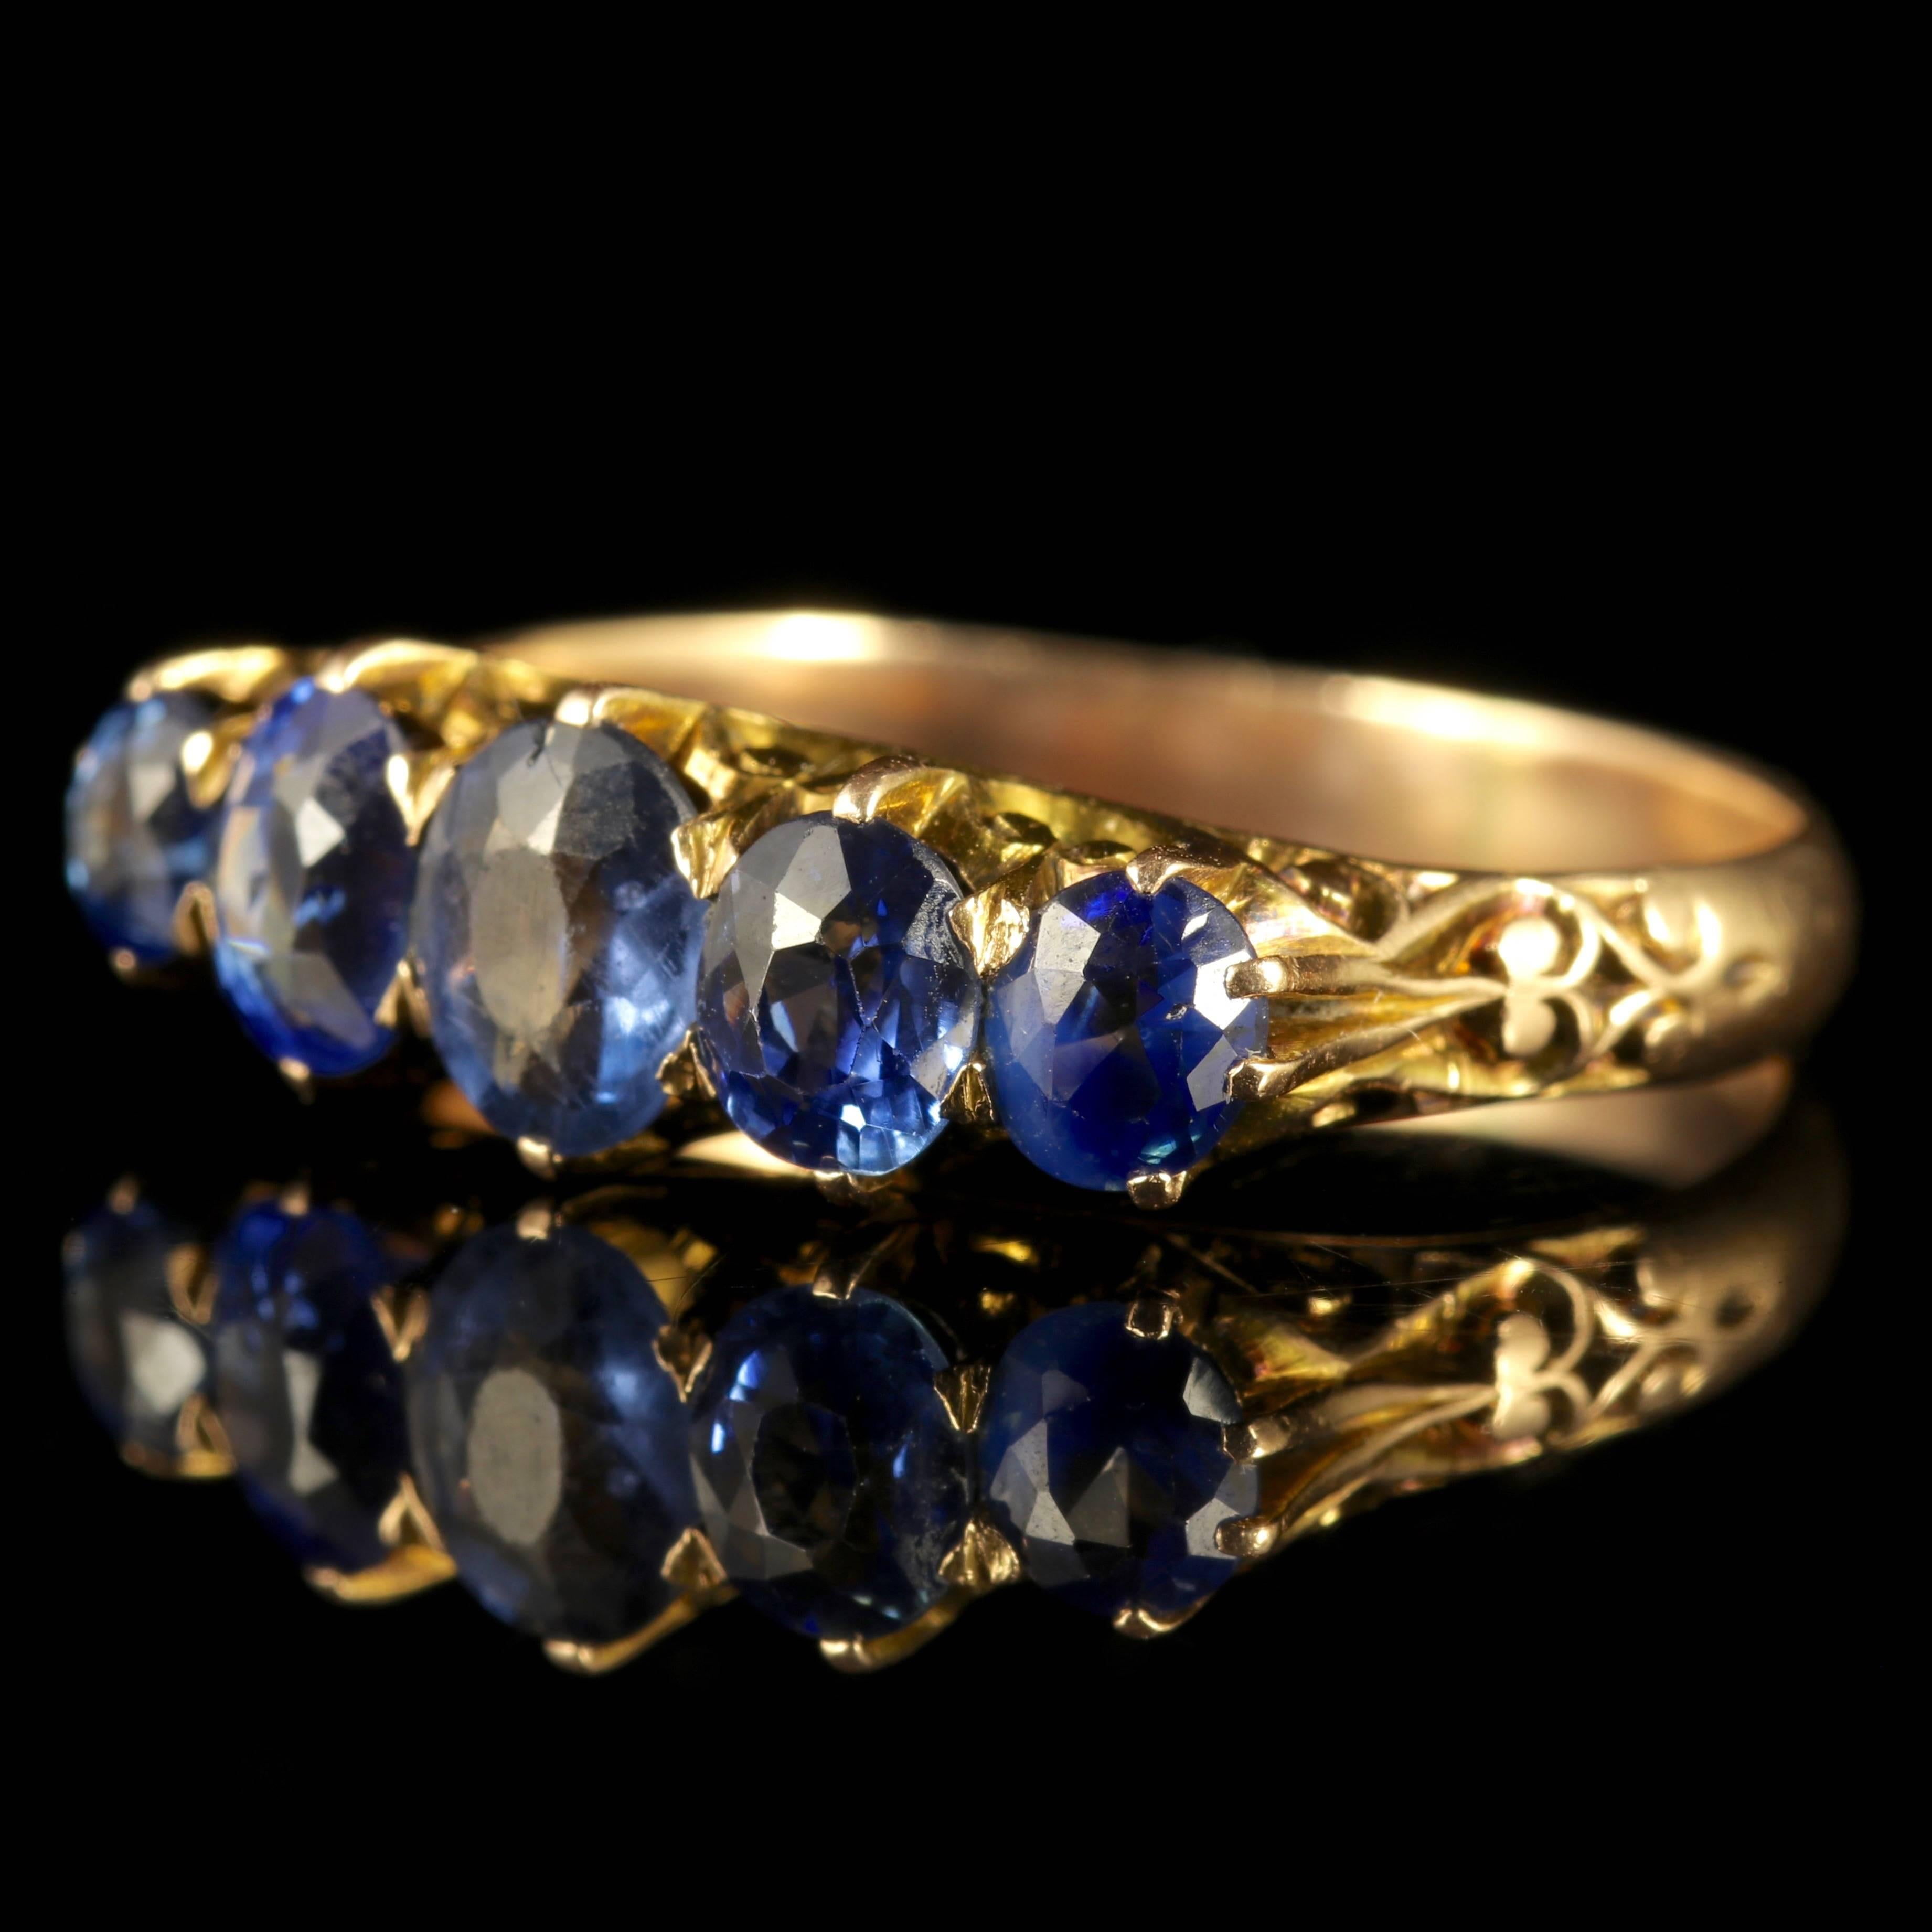 To read more please click continue reading below-

This fabulous Antique Victorian ring boasts five spectacular natural Sapphires which are set in a 18ct Yellow Gold gallery.

The central deep blue Sapphire is 0.75ct, graduating down to a total of